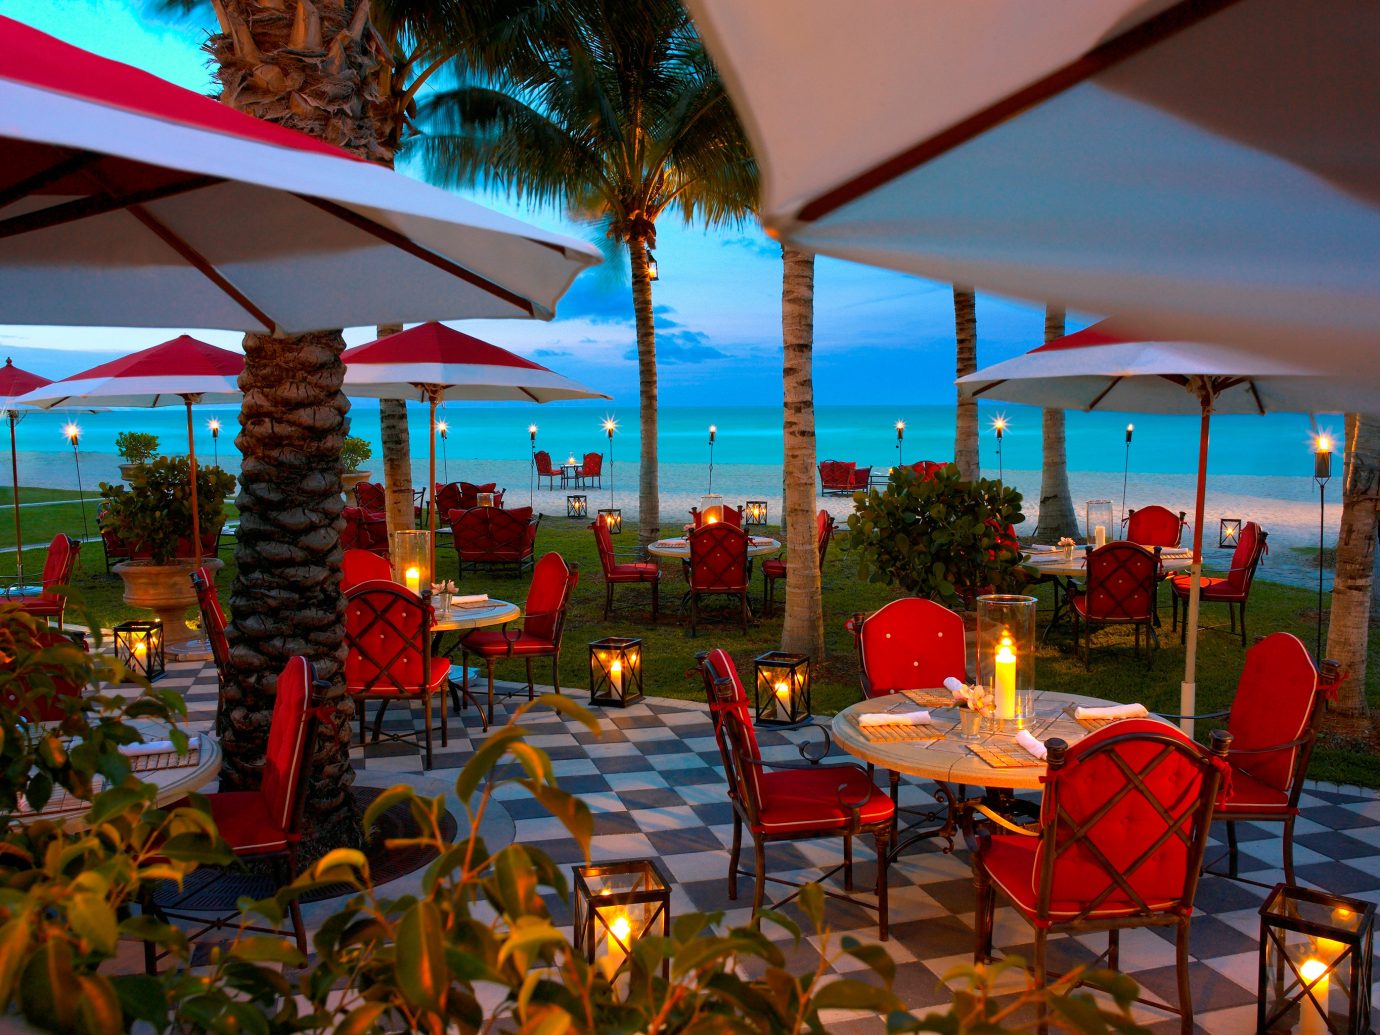 Beachfront Courtyard Dining Drink Eat Honeymoon Hotels Patio Romance Scenic views Terrace Waterfront umbrella chair outdoor Resort restaurant lawn vacation meal colorful set furniture several